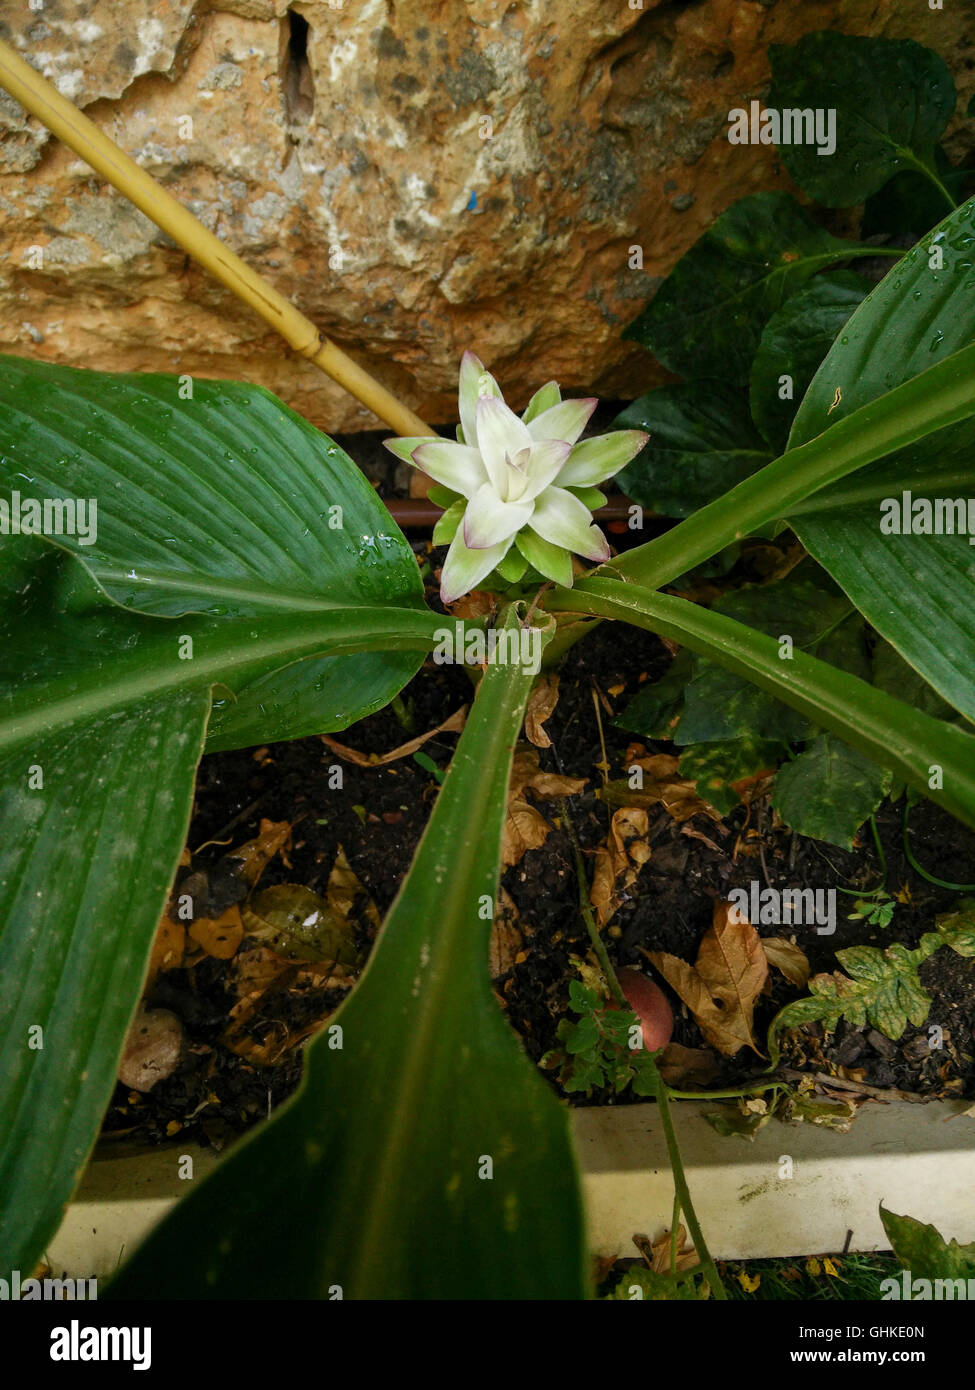 Flowering Turmeric (Curcuma longa)  The rhizome (root) of this plant is used to make a culinary spice. Stock Photo